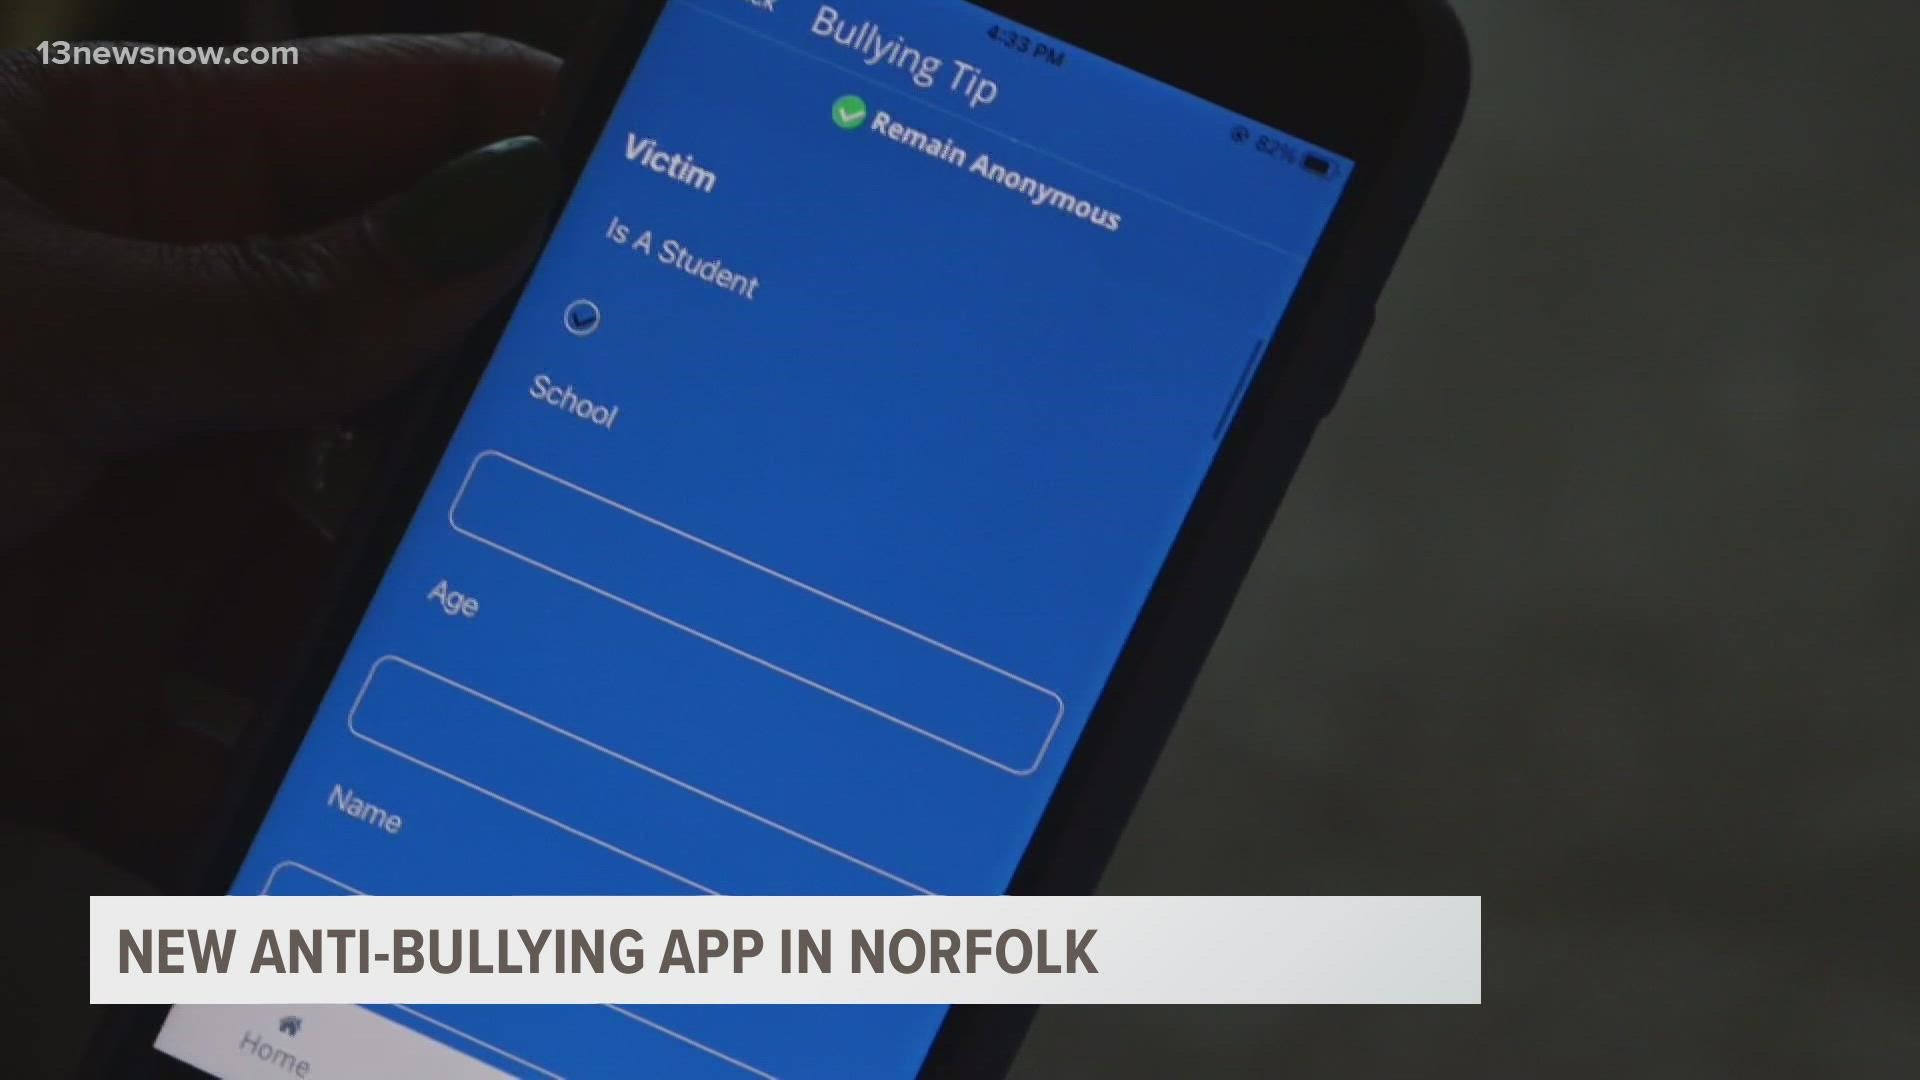 A Norfolk Public Schools spokesperson said this app is one of the ways Norfolk wants to ensure students are supported and can enjoy safe, social-emotional learning.